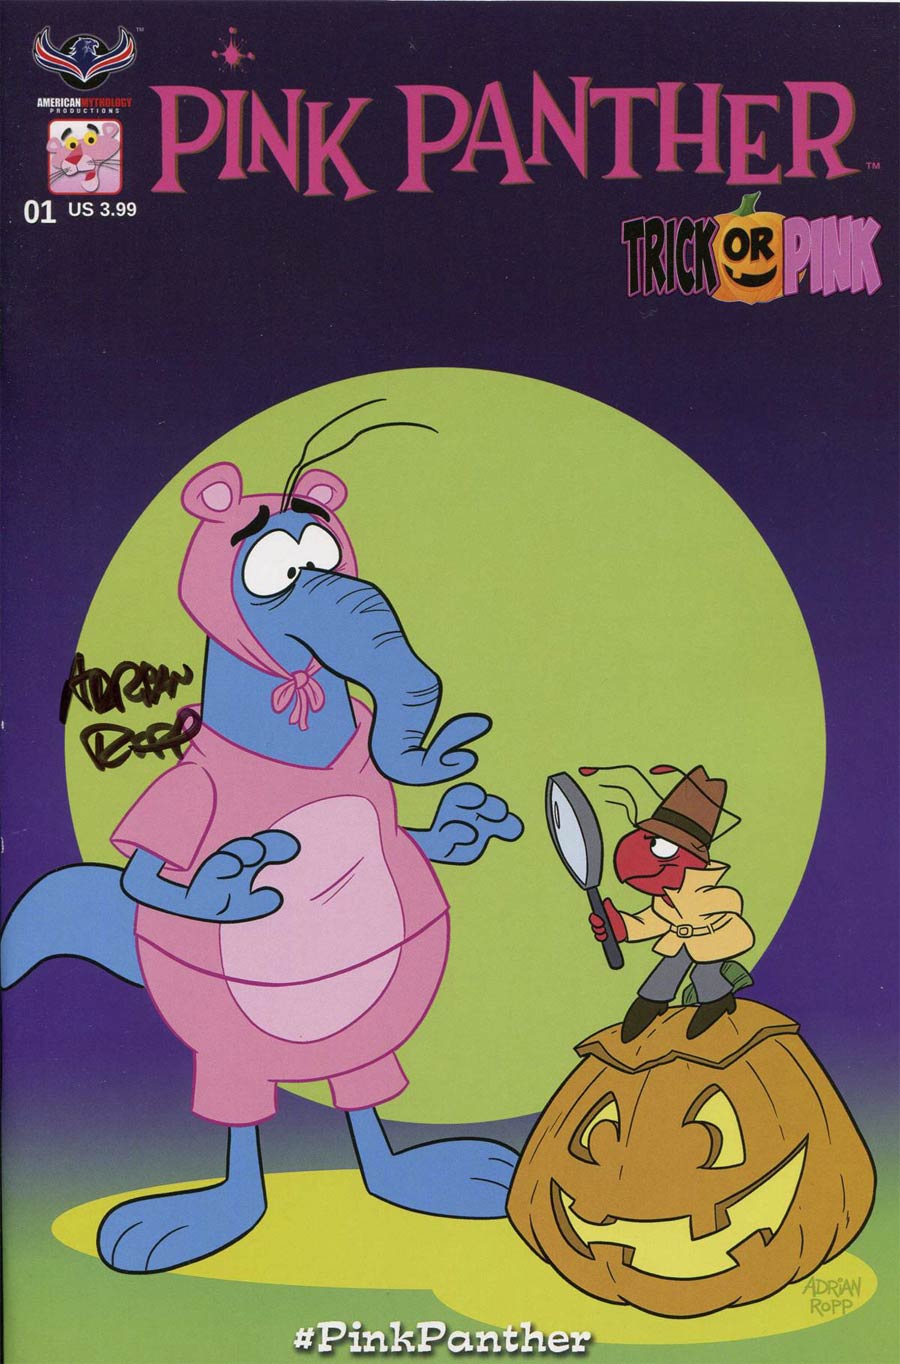 Pink Panther Trick Or Pink #1 Cover F Limited And The Aardvark Variant Cover Signed By Adrian Ropp